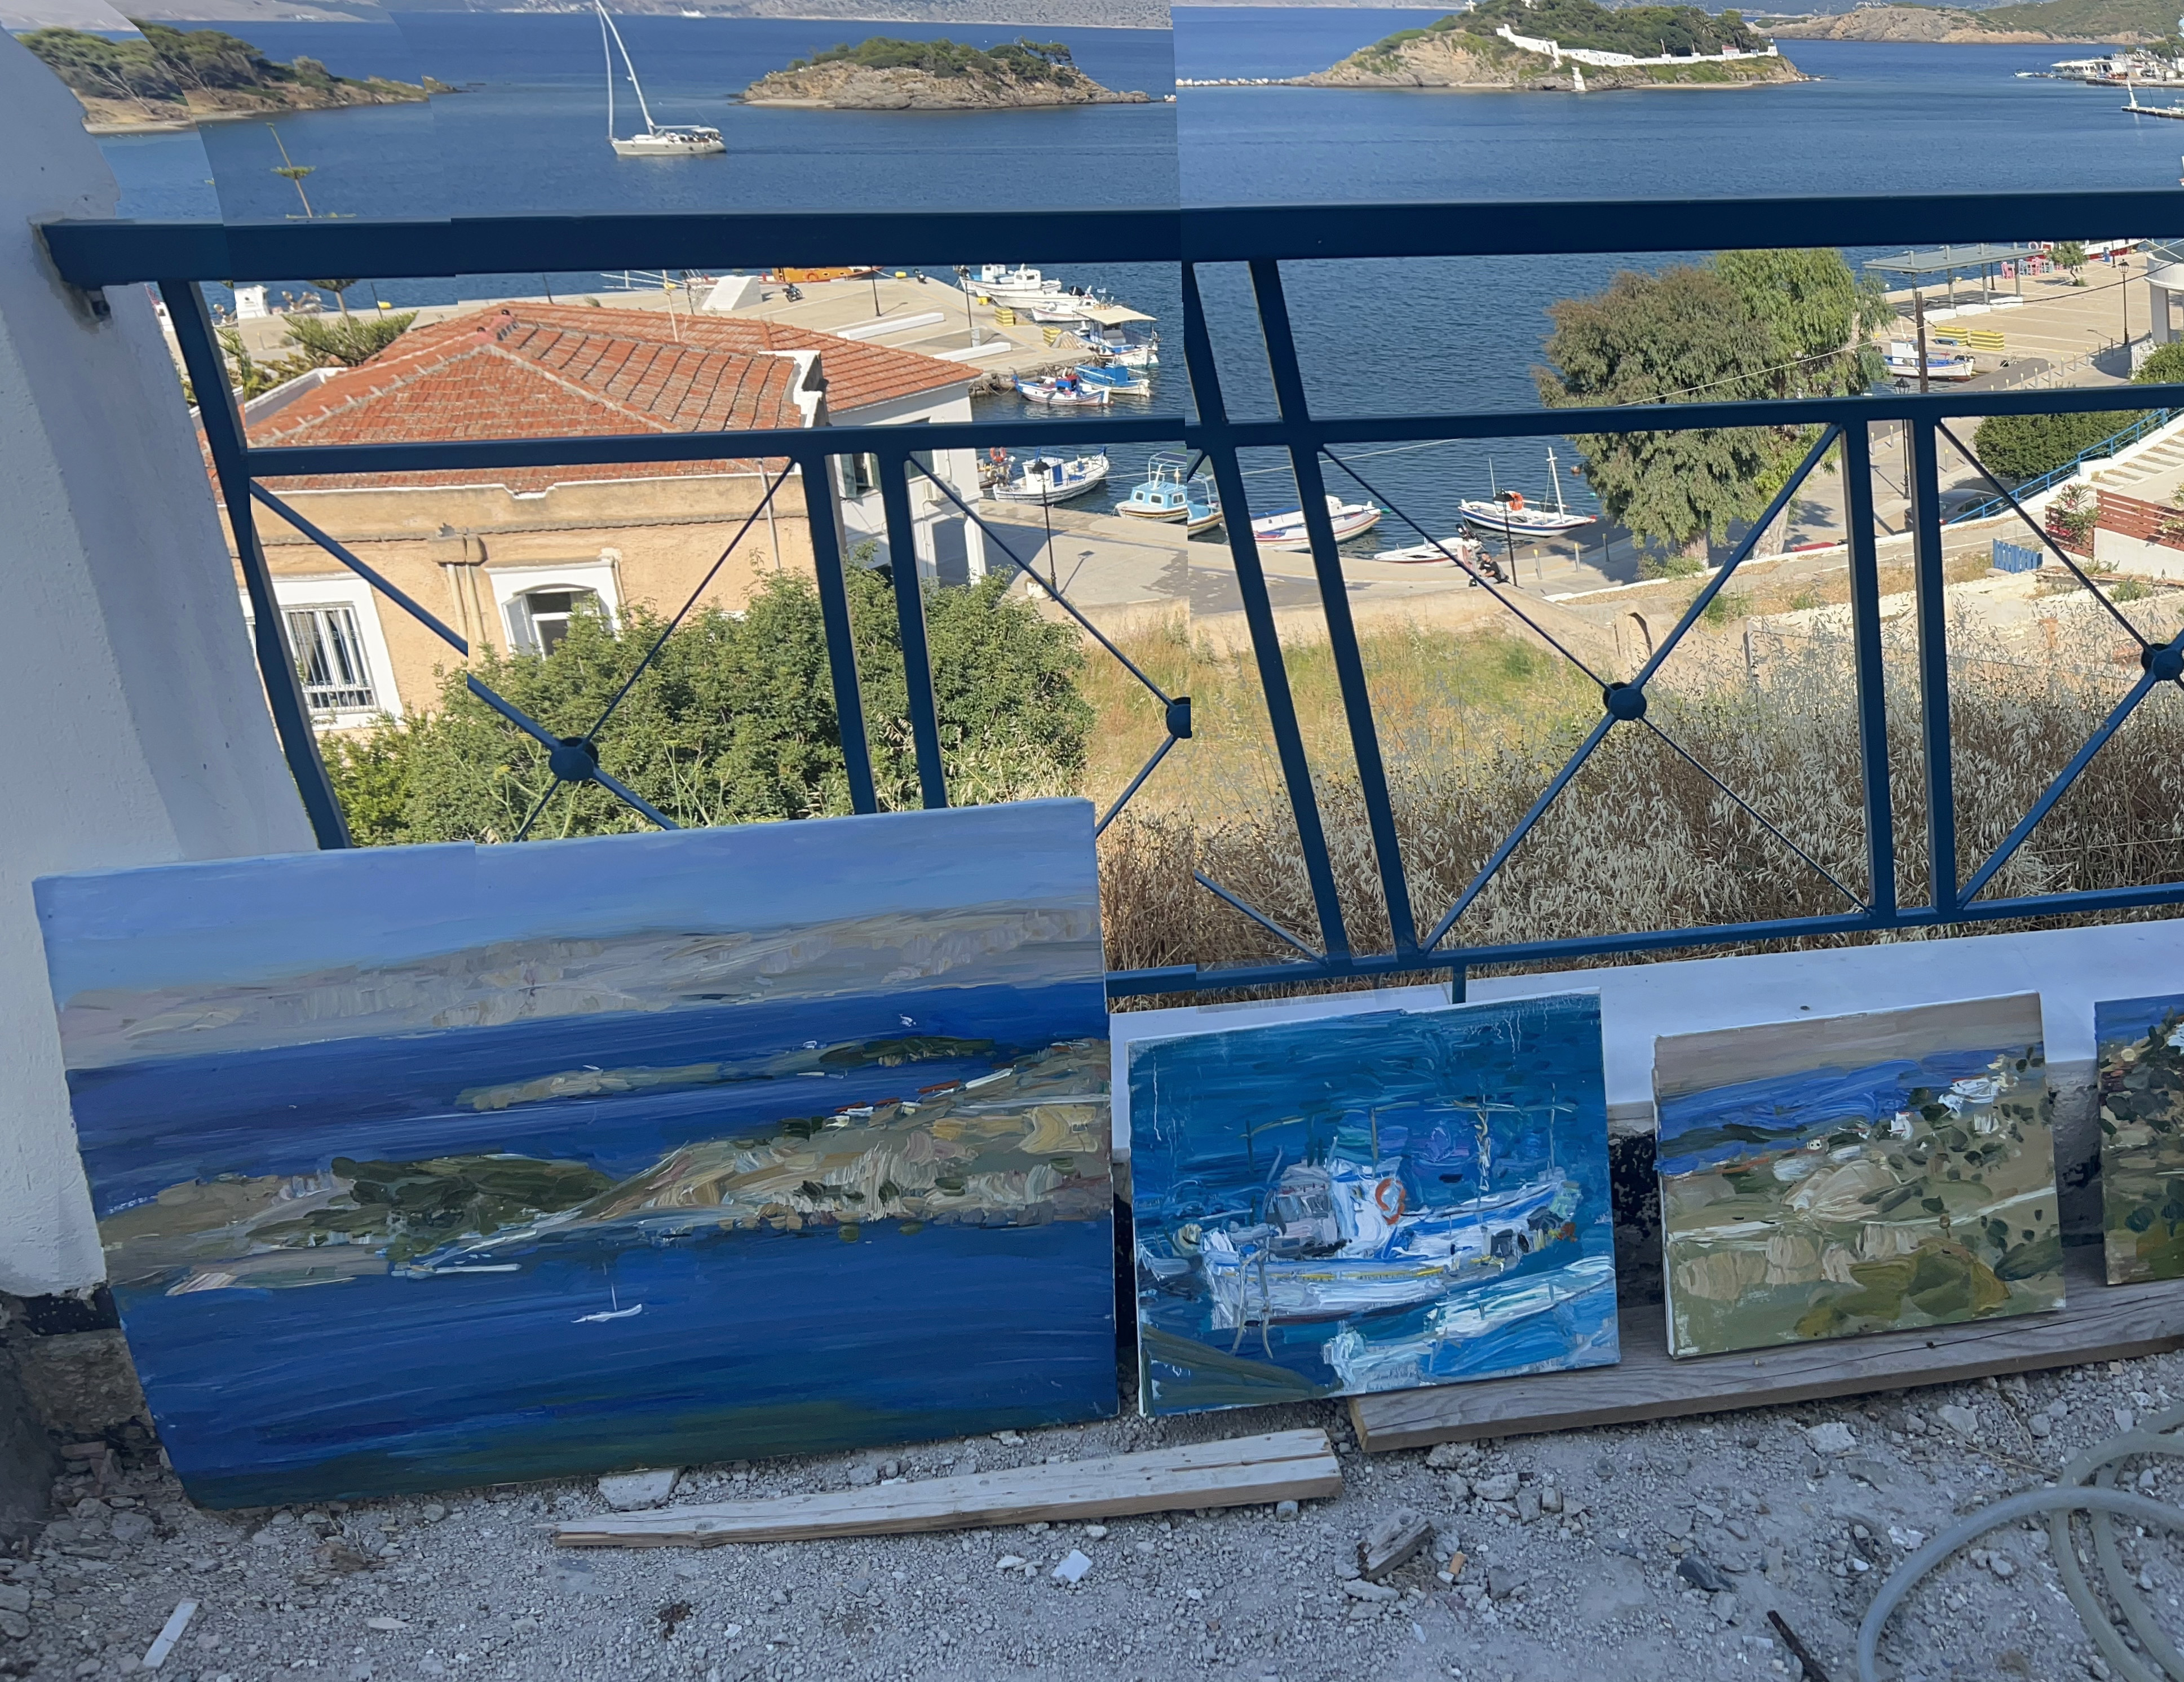 Richard Colson's paintings on Oinusses, Greece